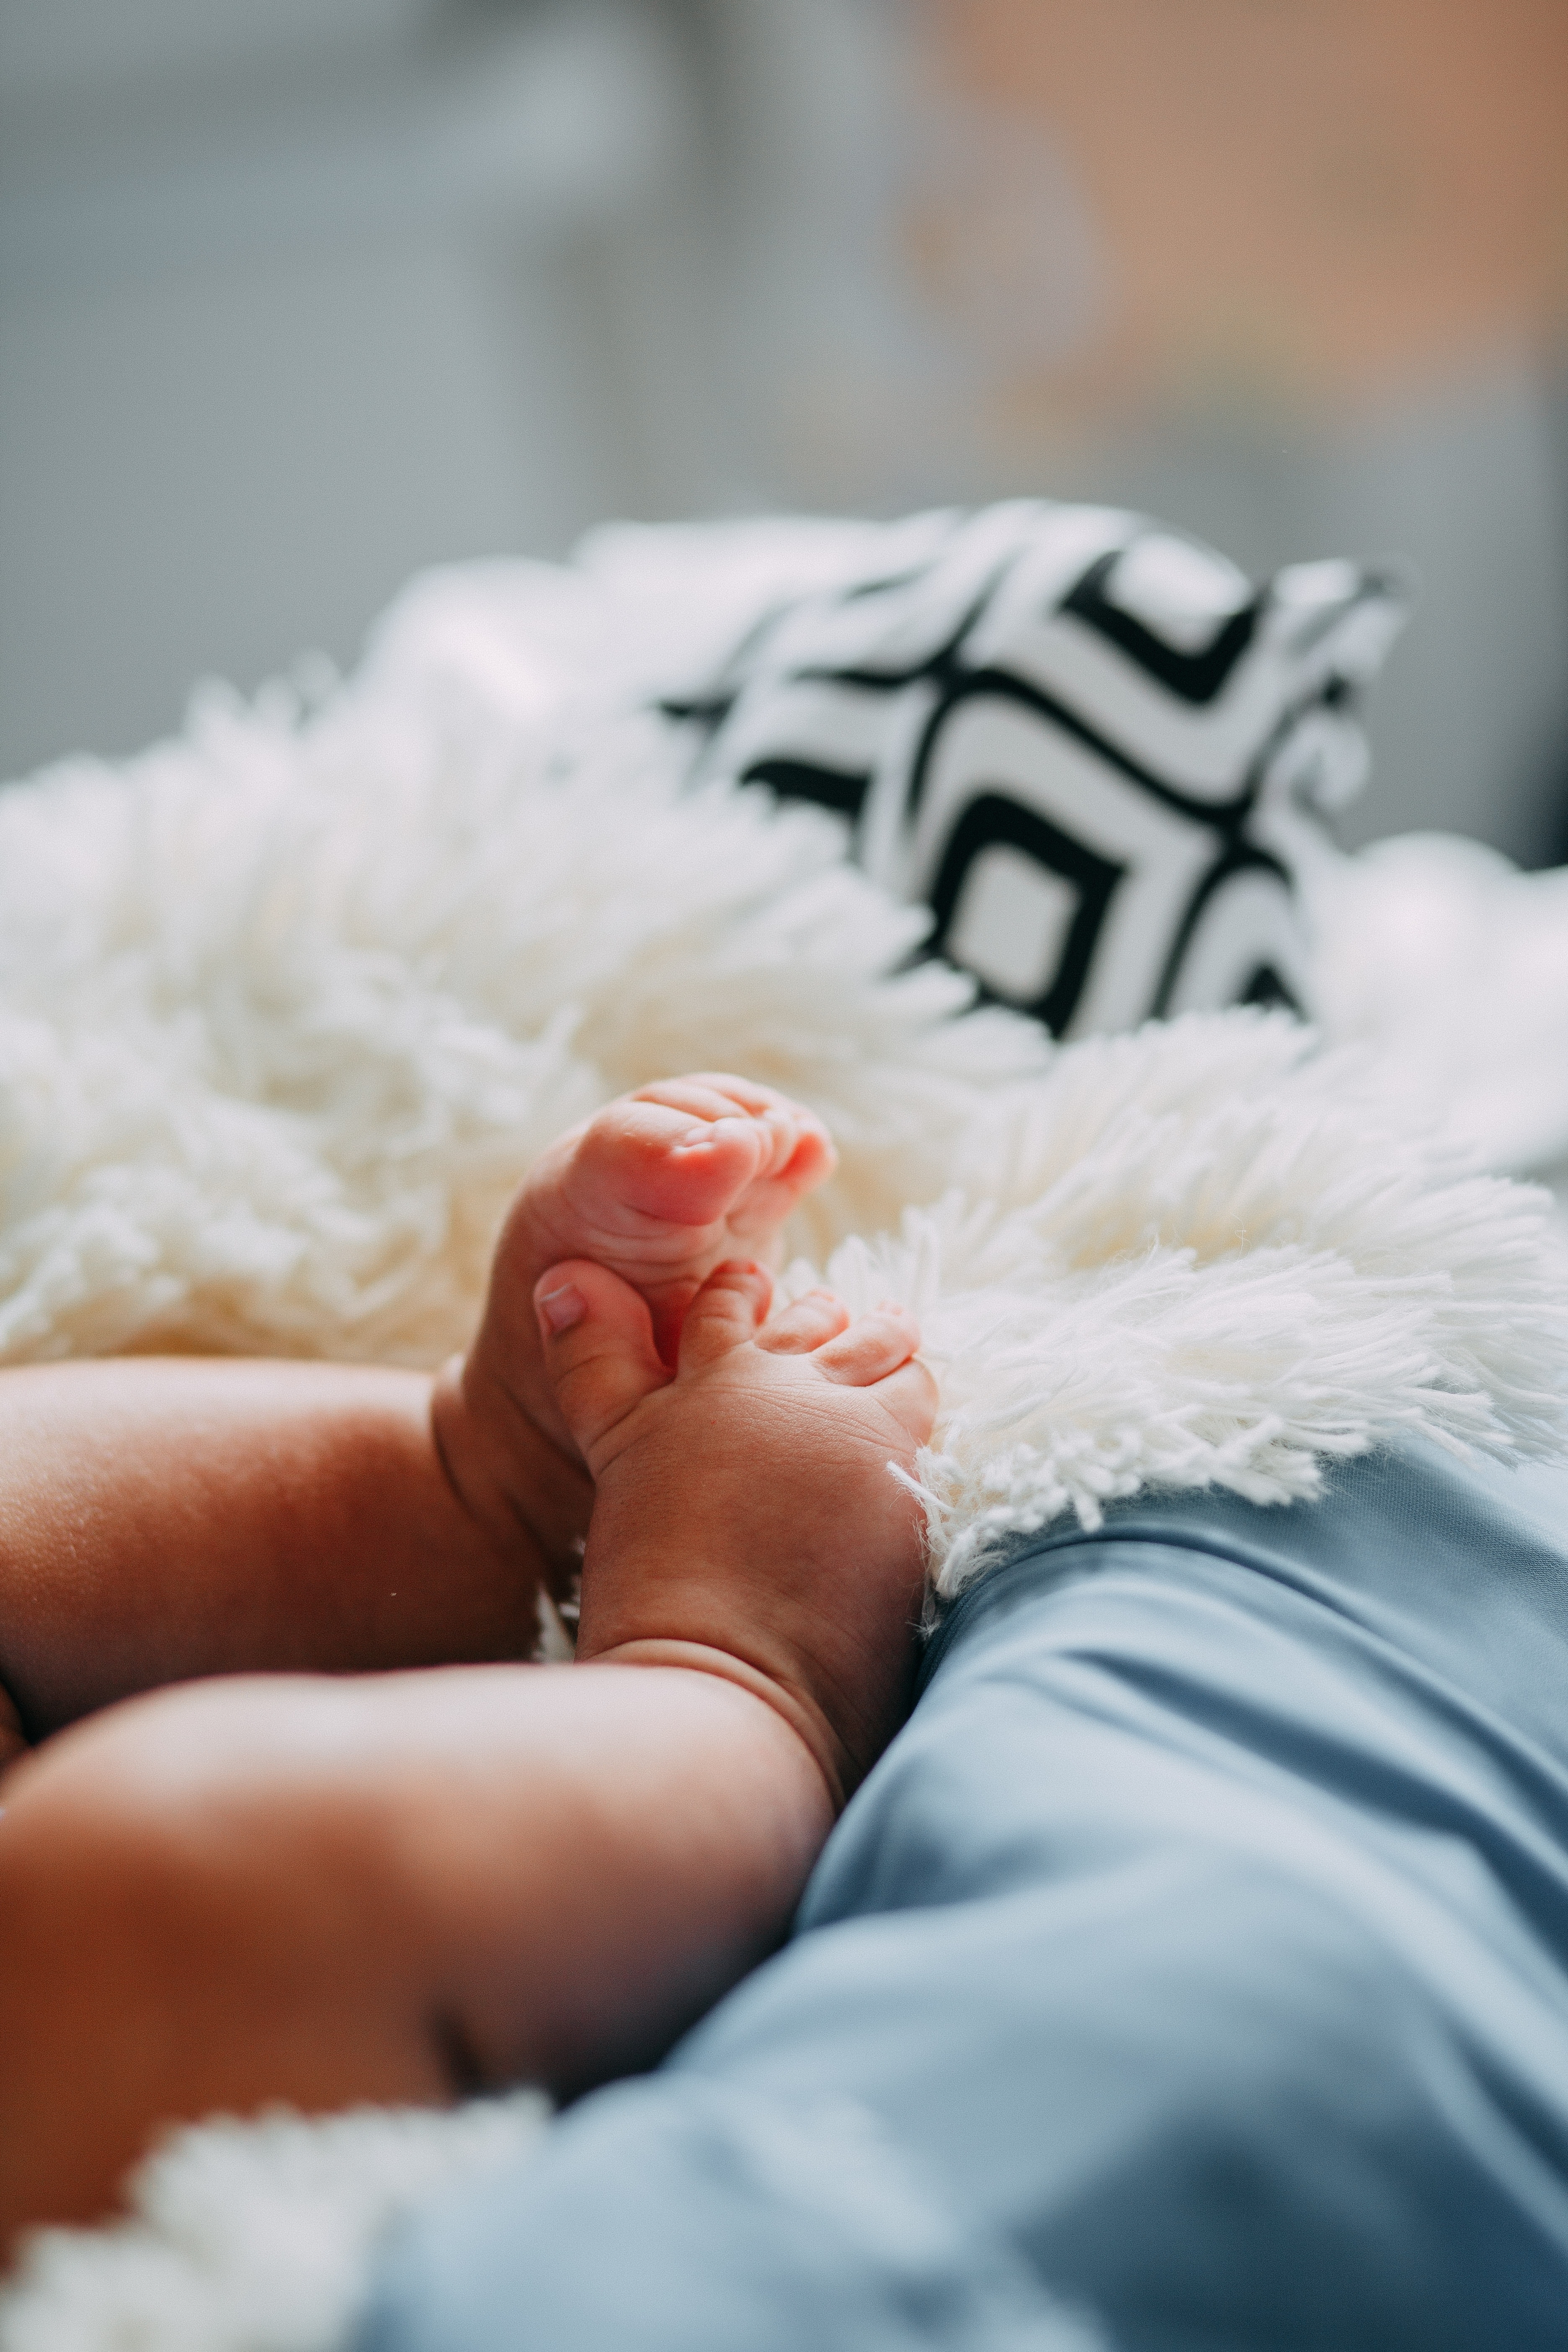 How to Choose a Photographer for Your Newborn Photoshoot? 